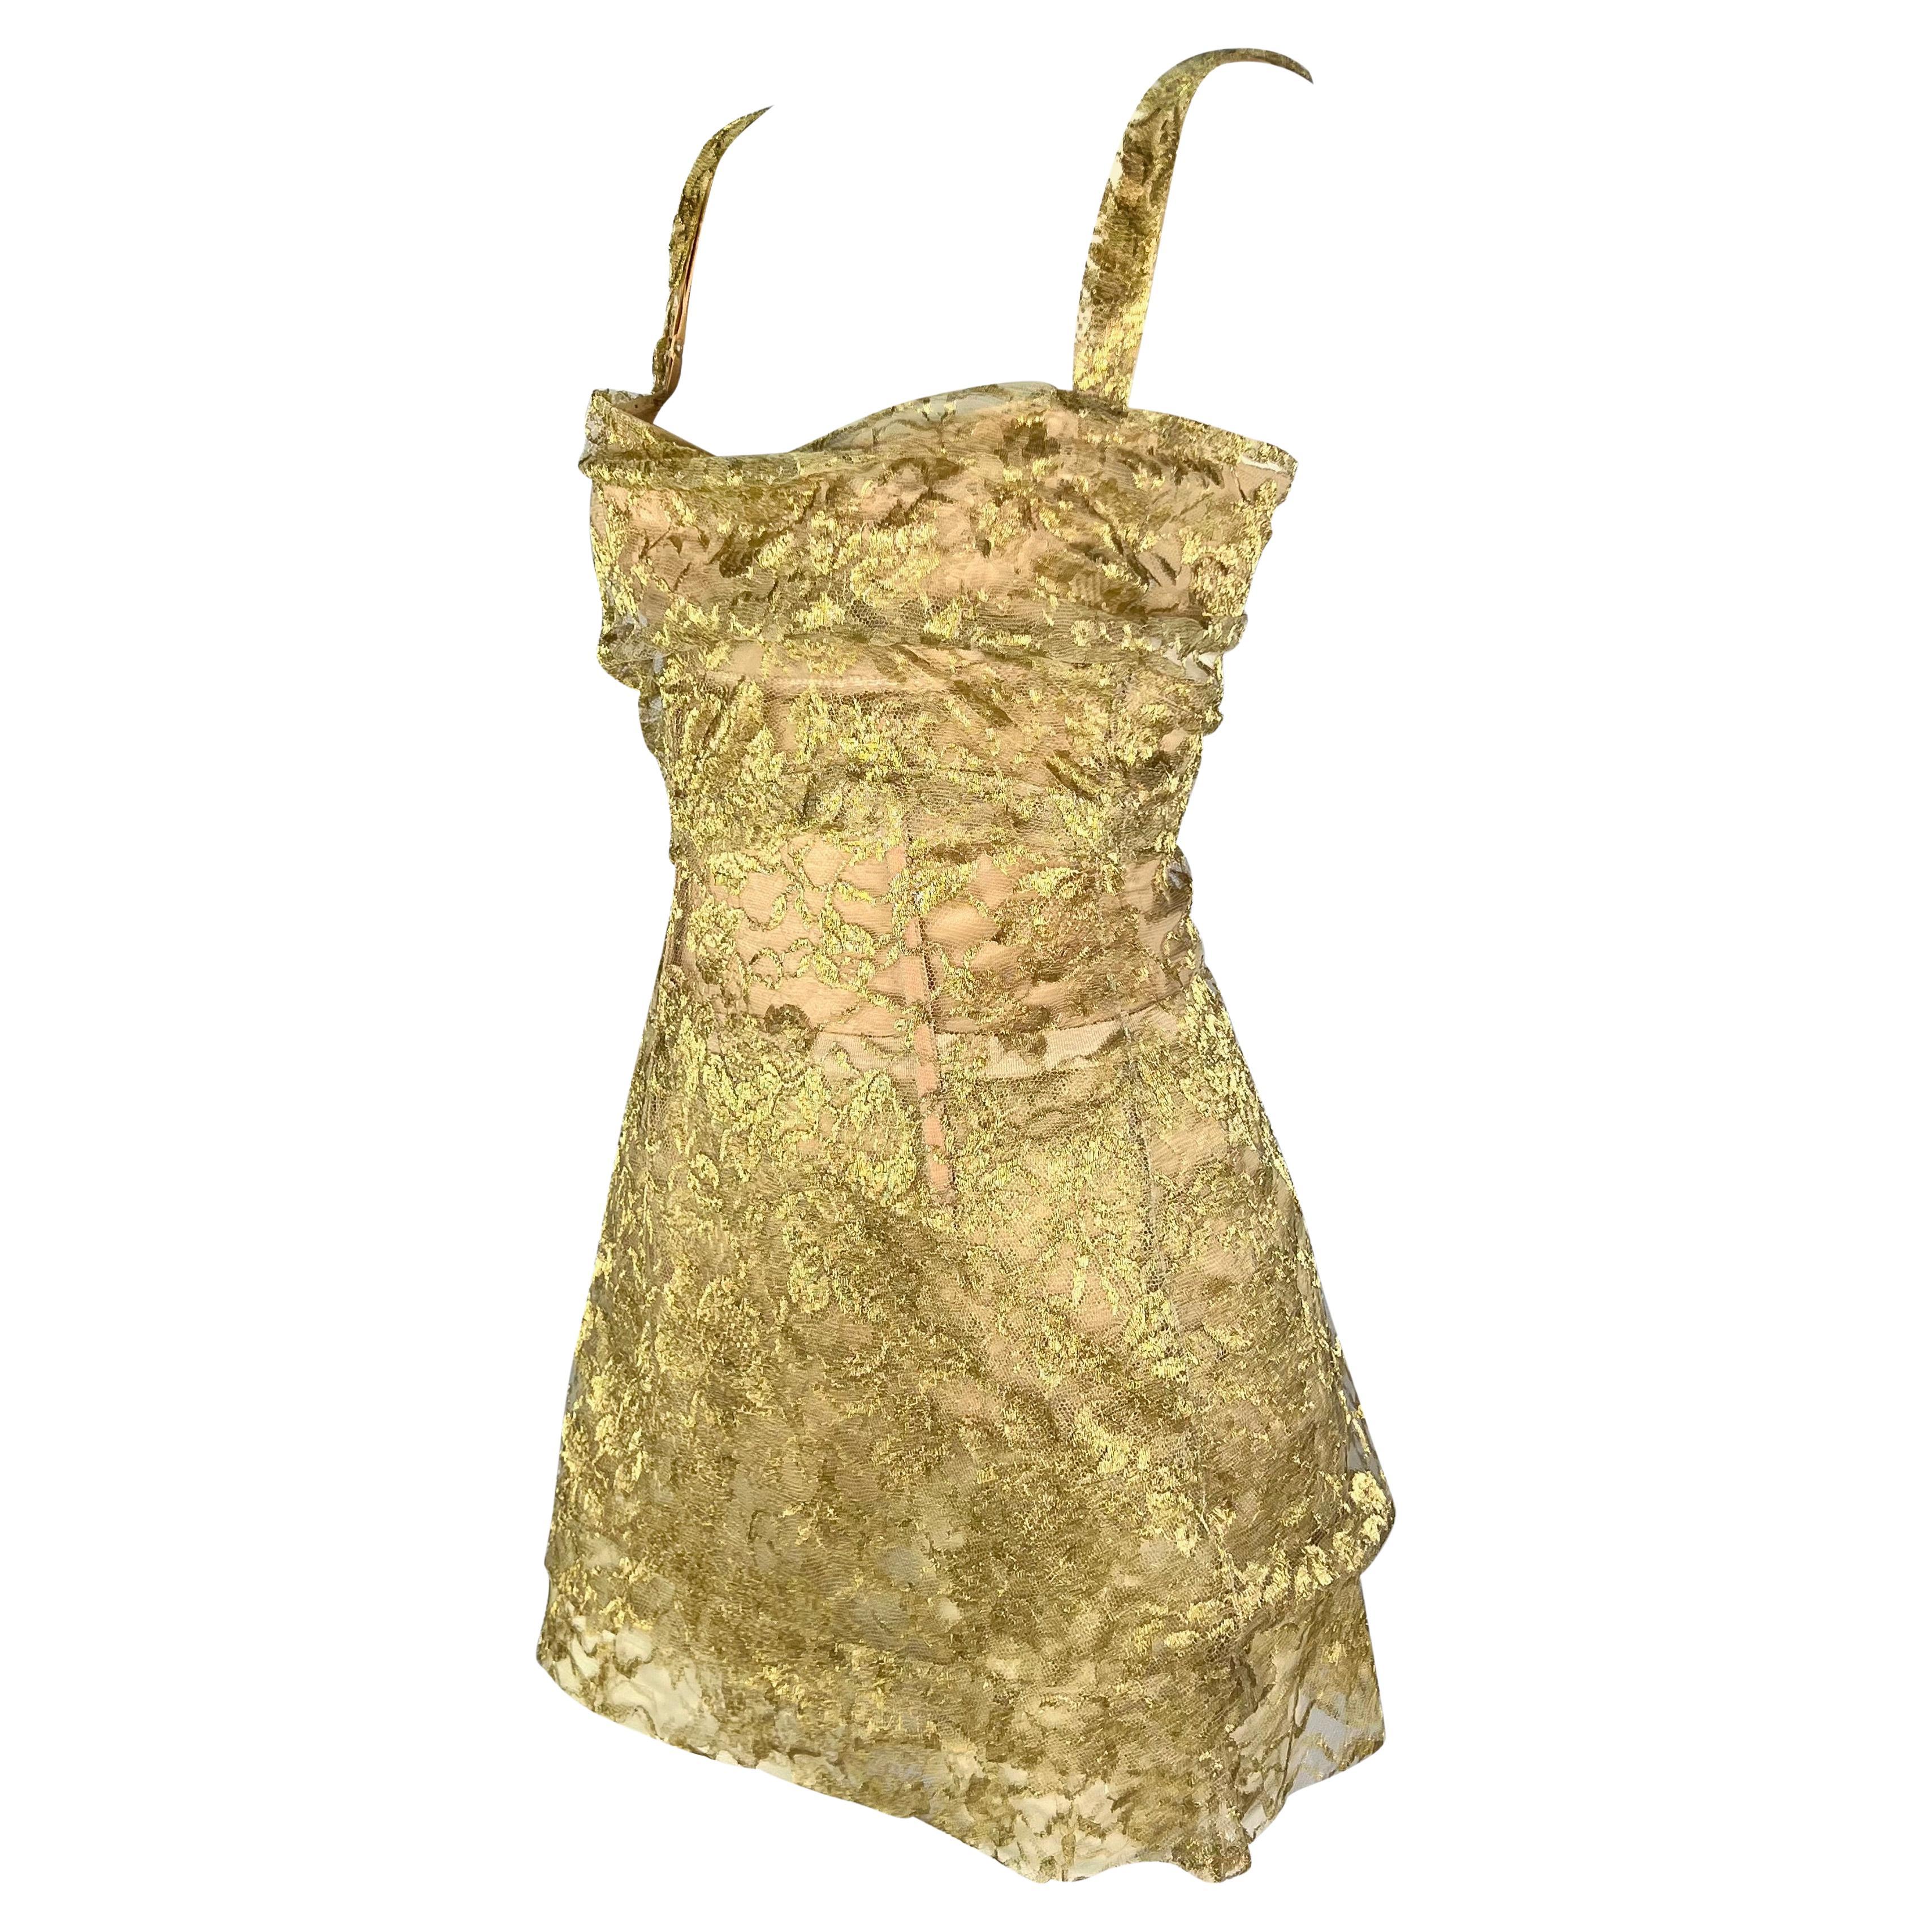 F/W 1996 Dolce & Gabbana Sheer Gold Lace Corset Boned Beige Bodysuit Mini Dress In Excellent Condition For Sale In West Hollywood, CA